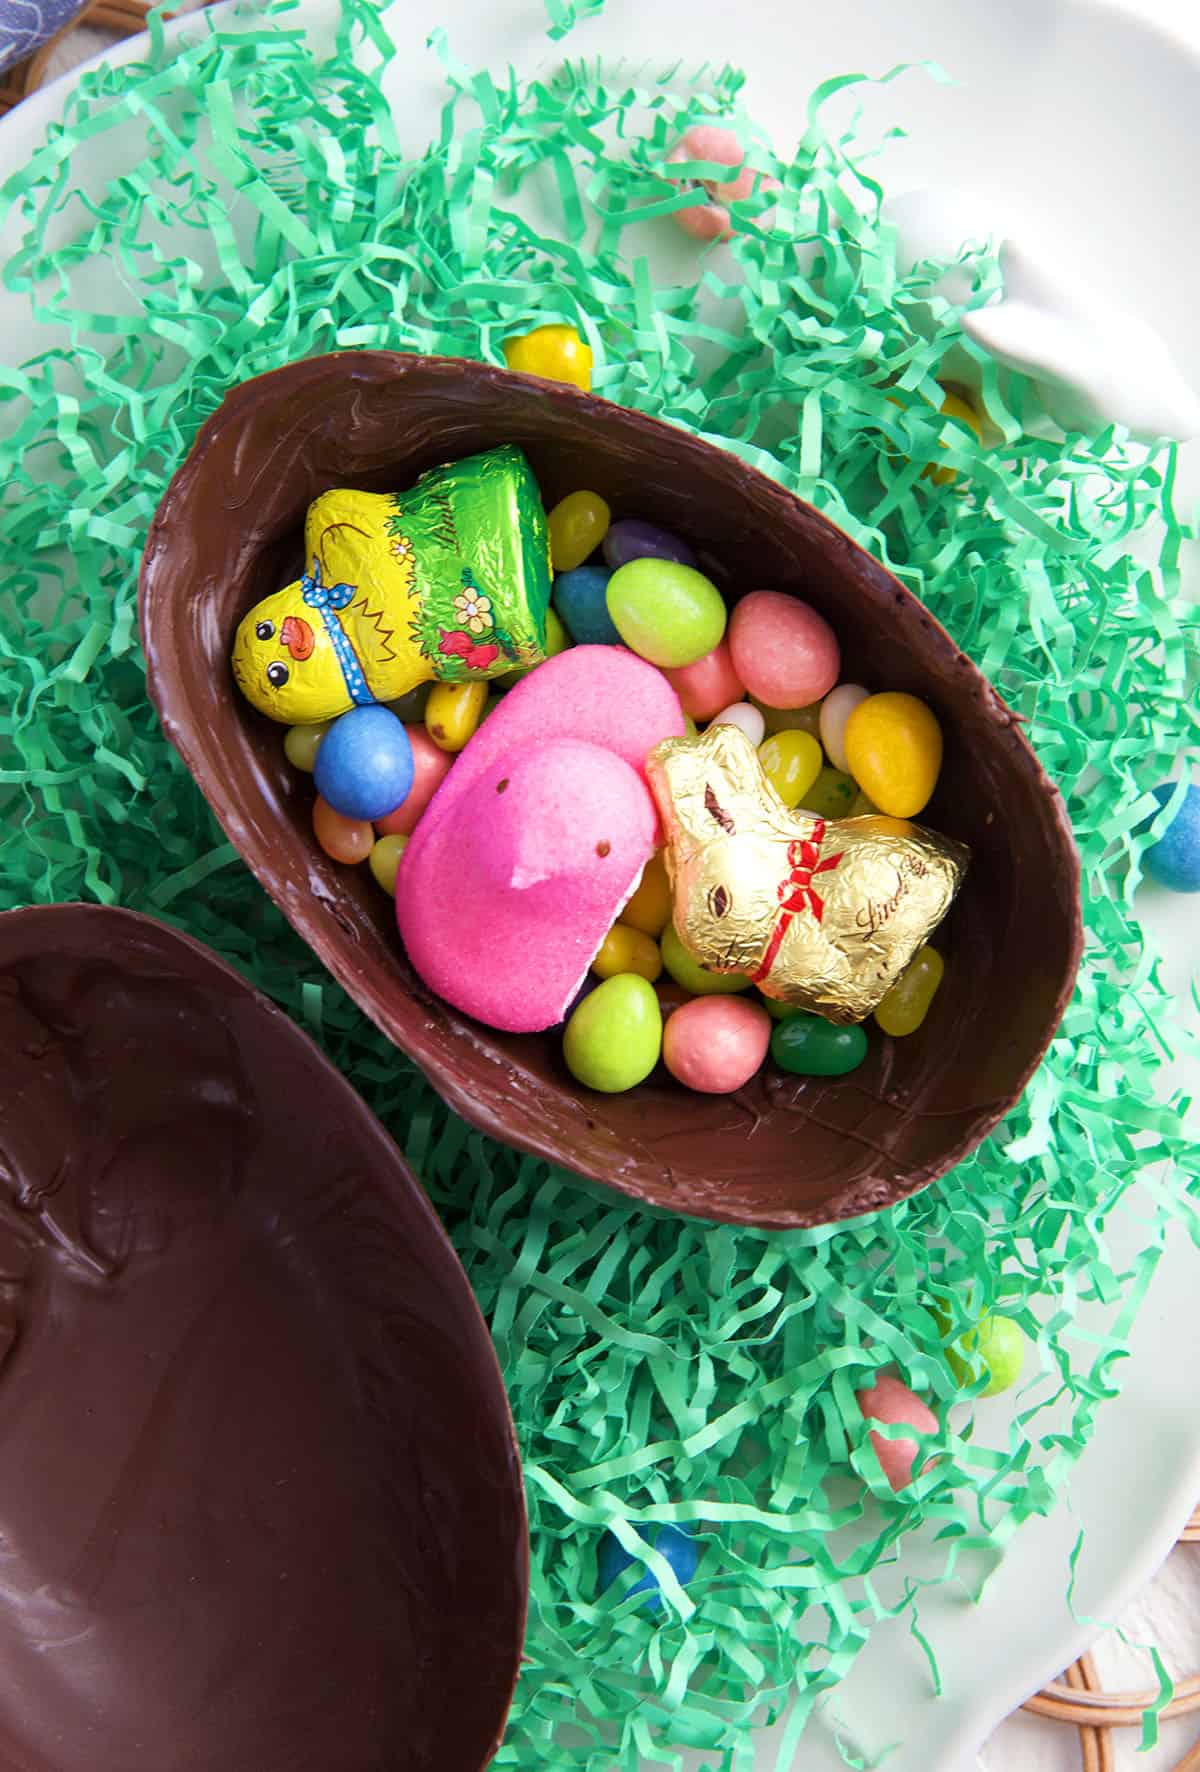 Easter candies are placed in one half of a chocolate egg.